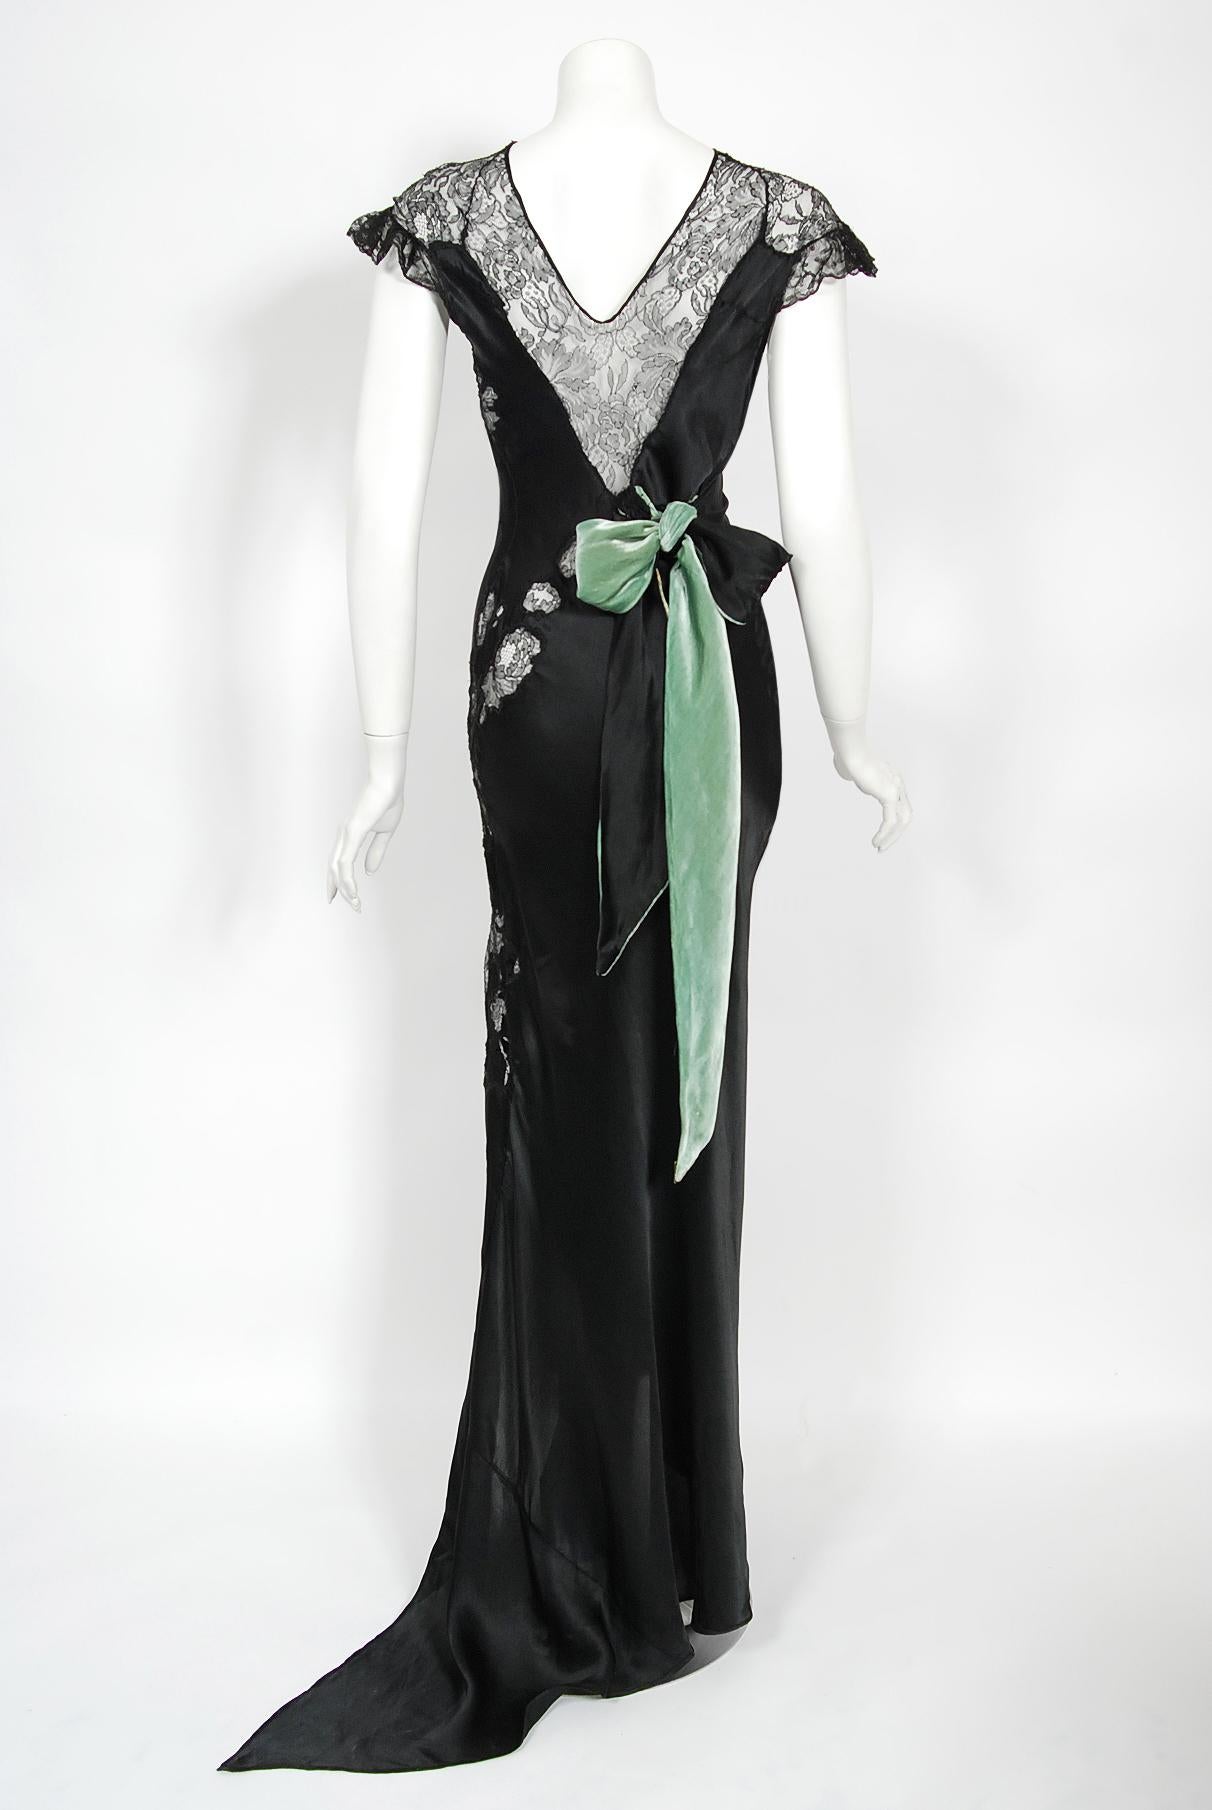 Vintage 1930's Black Silk & Sheer Lace Cut Outs Hourglass Bias-Cut Trained Gown  12